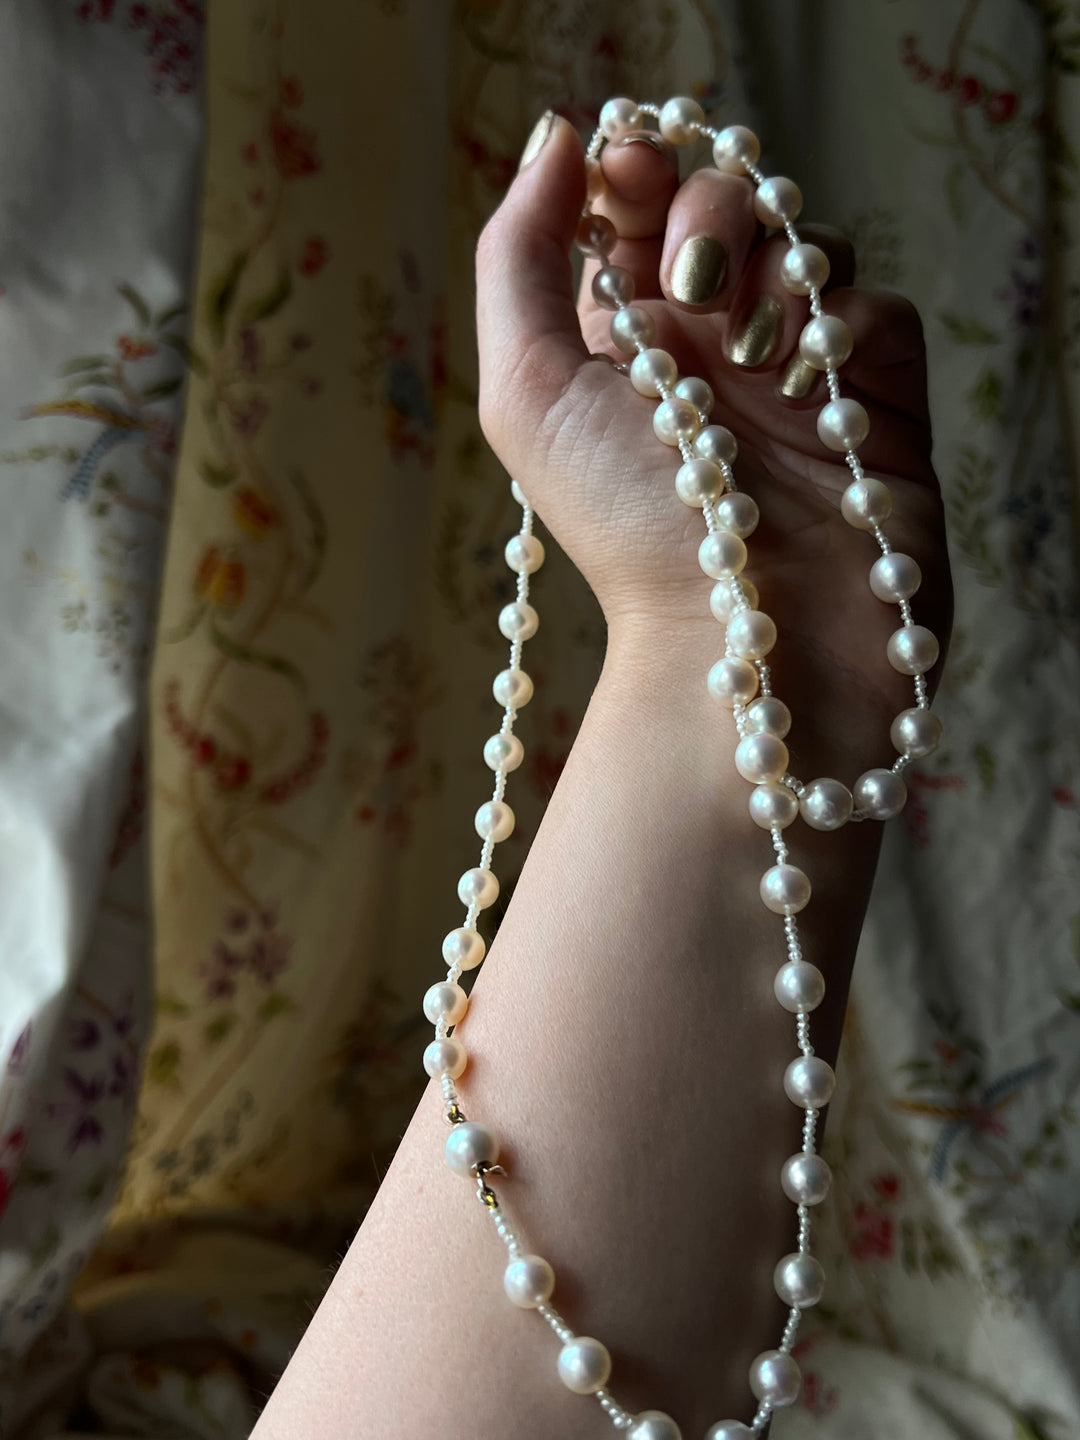 Vintage "Constellation" Pearl Necklace with Seed Pearl Spacing